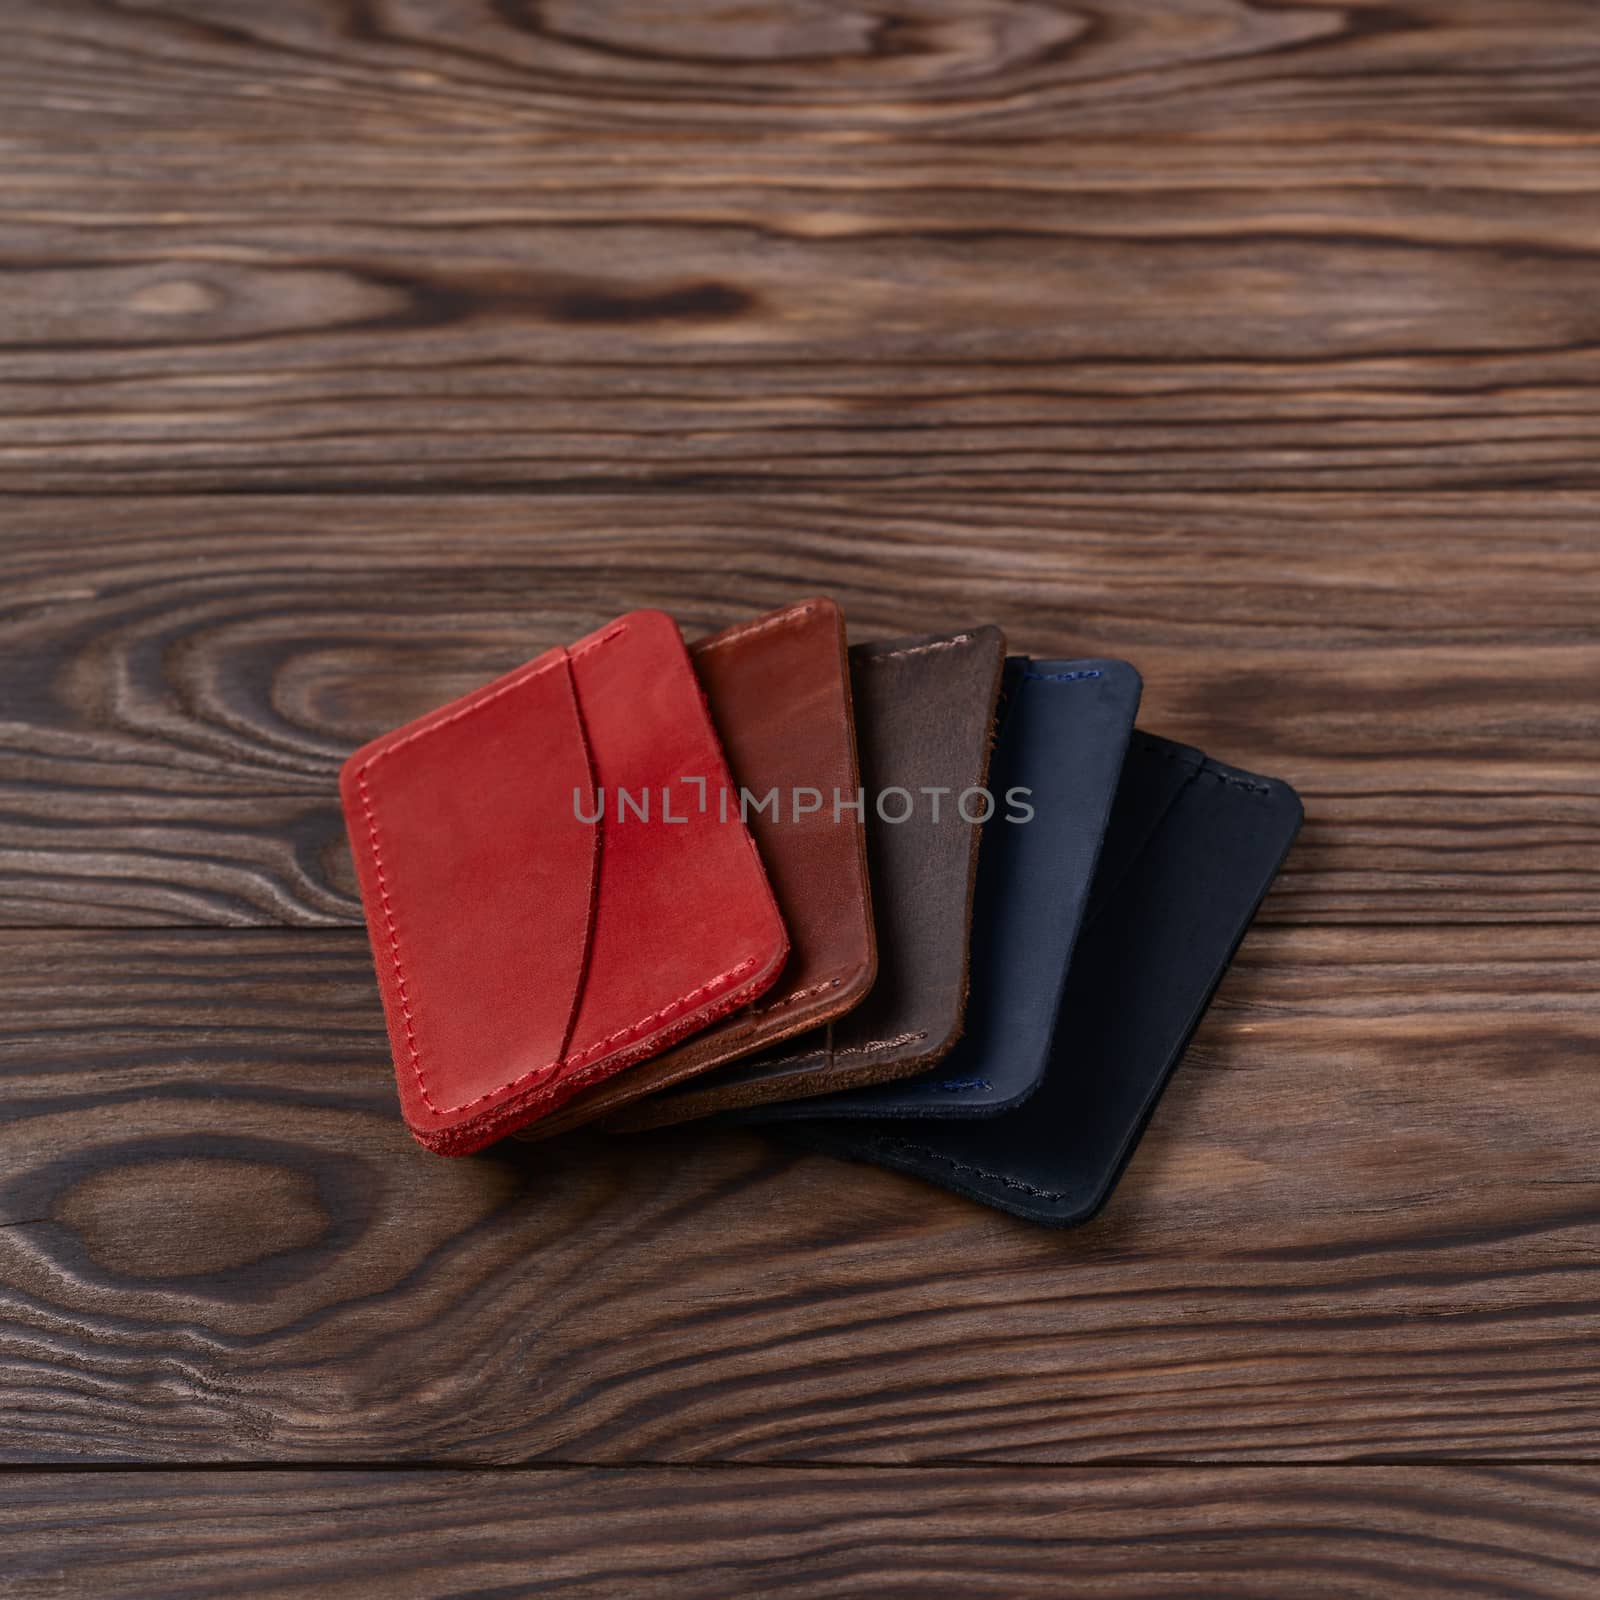 Five handmade leather cardholders on wooden background lie one on another. Stock photo with blurred background.